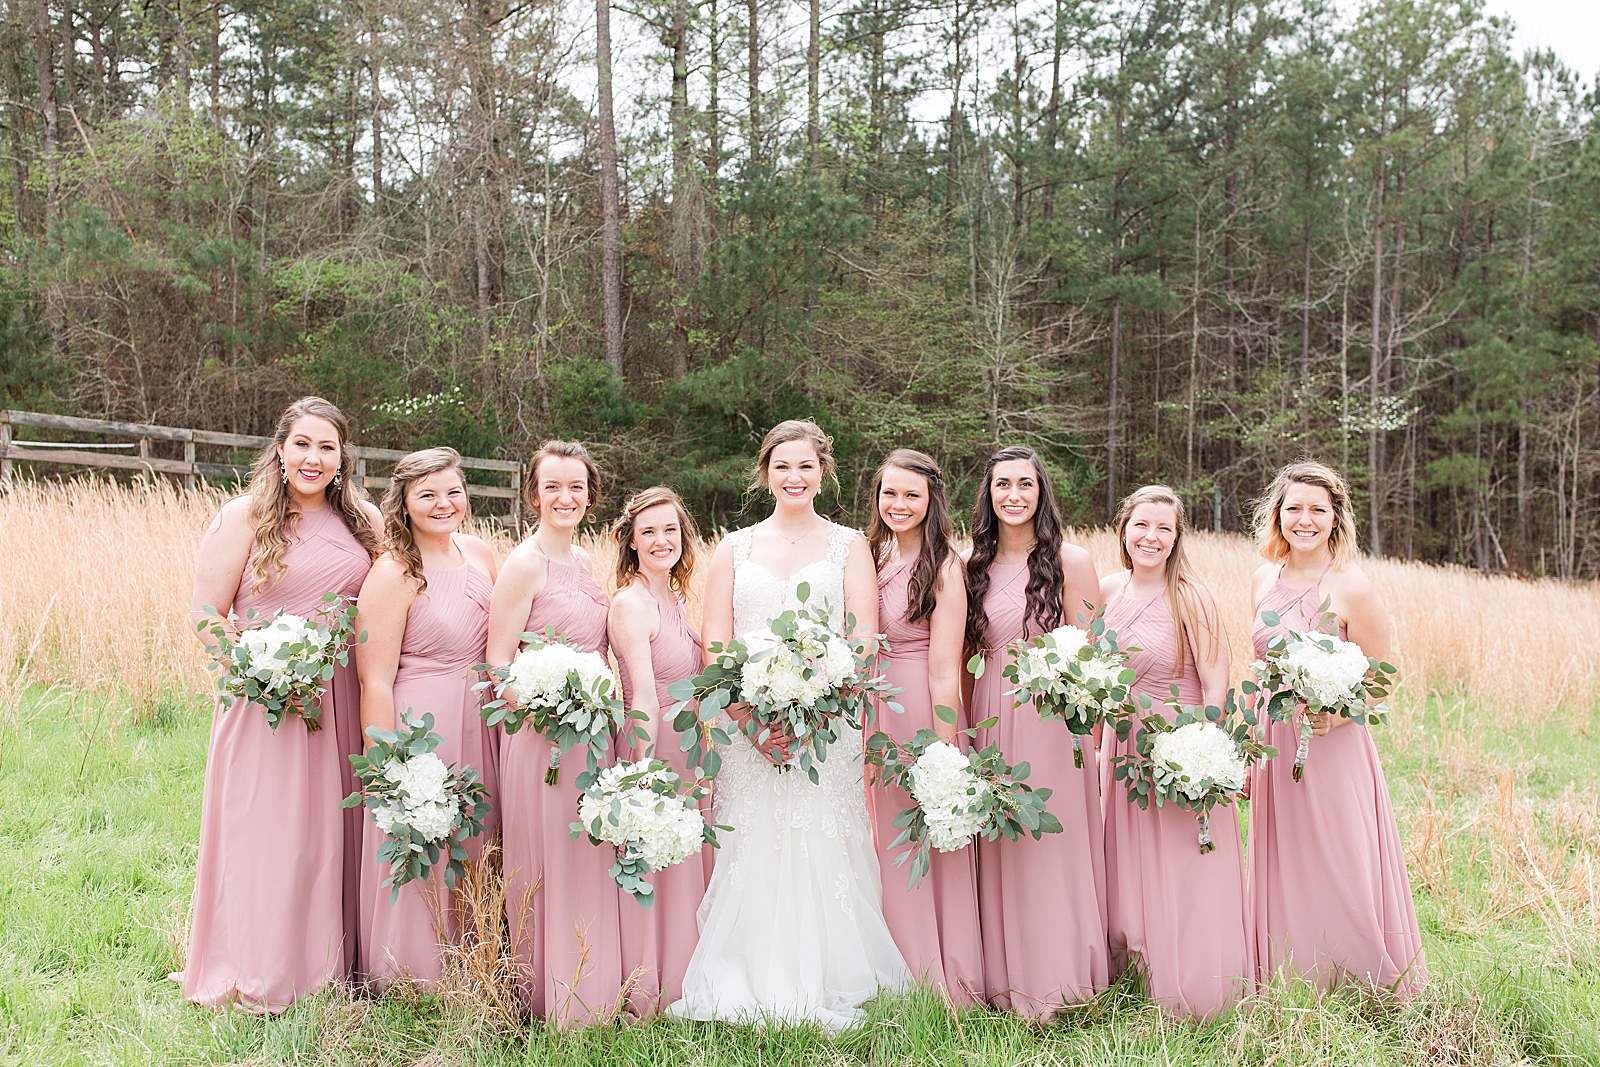 Macedonia Hills Wedding Bride with Bridesmaids in Dusty Rose and White Hydrangea Flowers Photo